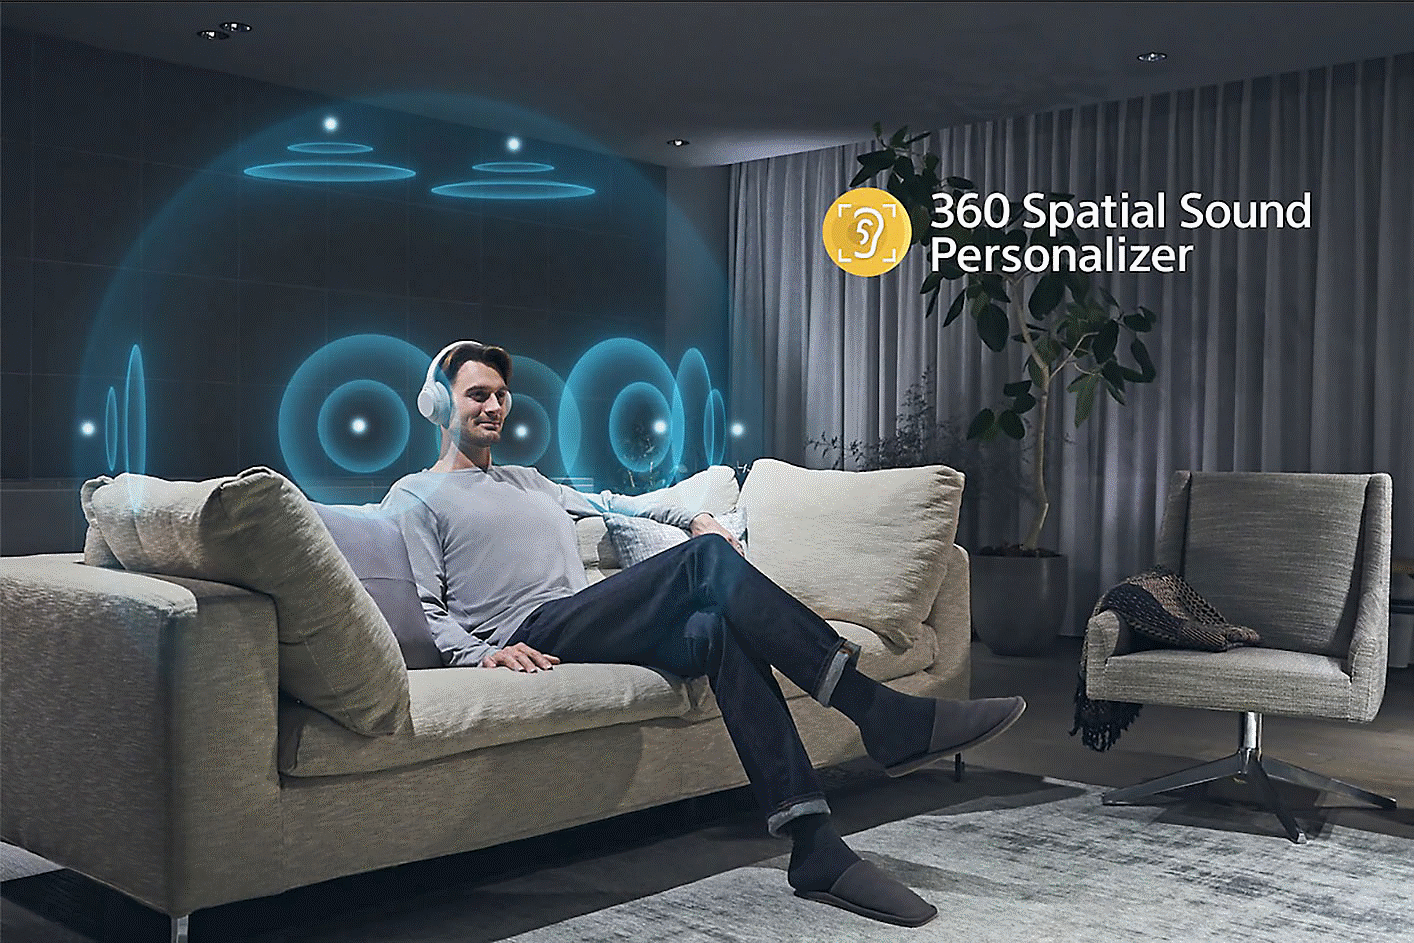 Image of a person on a sofa wearing headphones surrounded by concentric circles and 360 Spatial Sound logo on the right